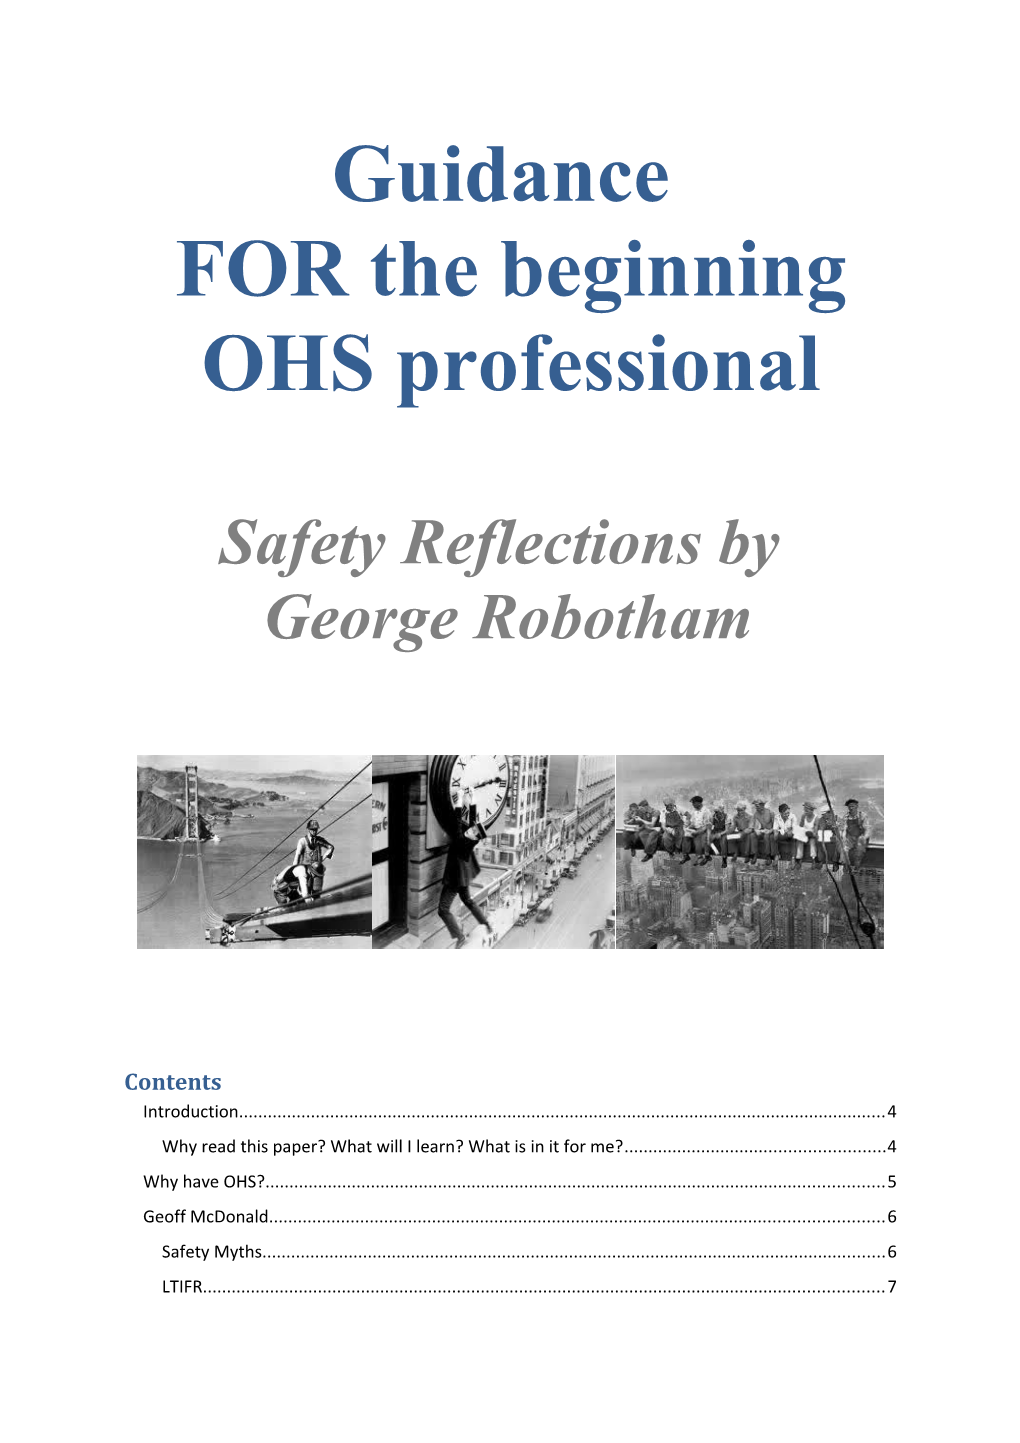 FOR the Beginning OHS Professional